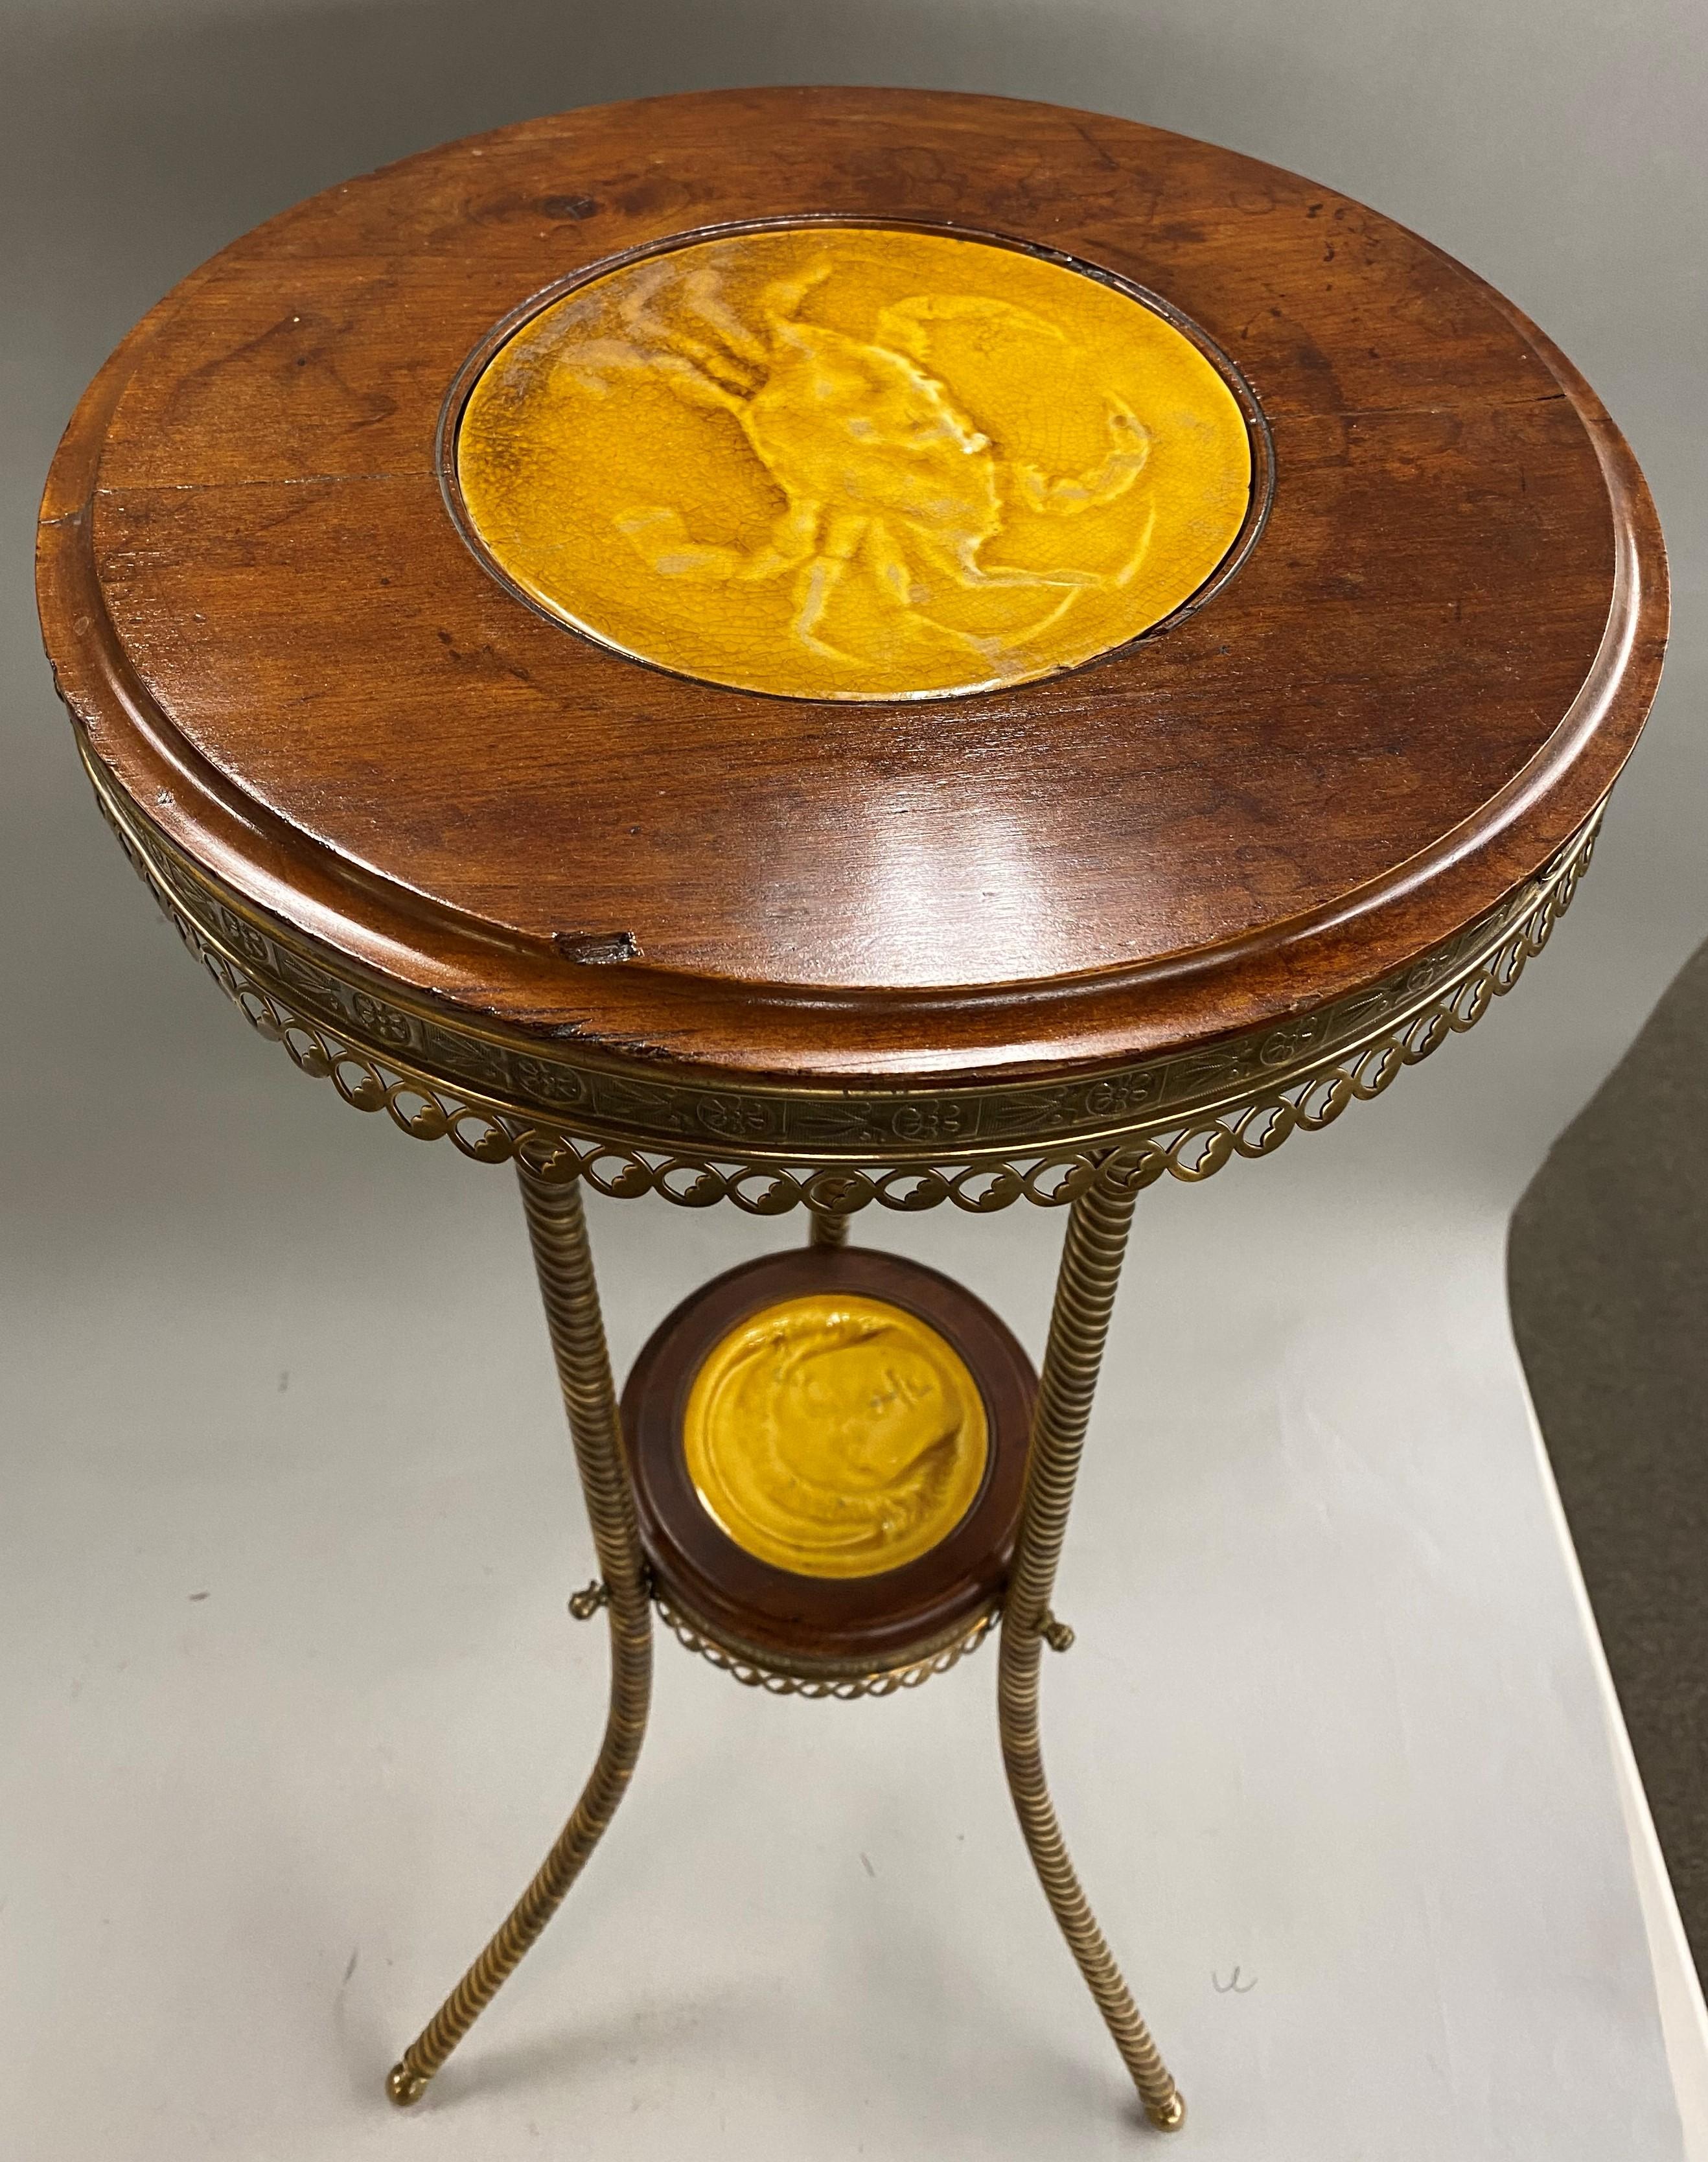 A beautiful round wooden and brass pedestal or tripod stand with butterscotch tile inserts in the top and medial stretcher, the upper tile featuring a crab, signed on tile base “J. & J.G. Low, Patent, Art Tile Works, Chelsea, Mass, USA, copyright